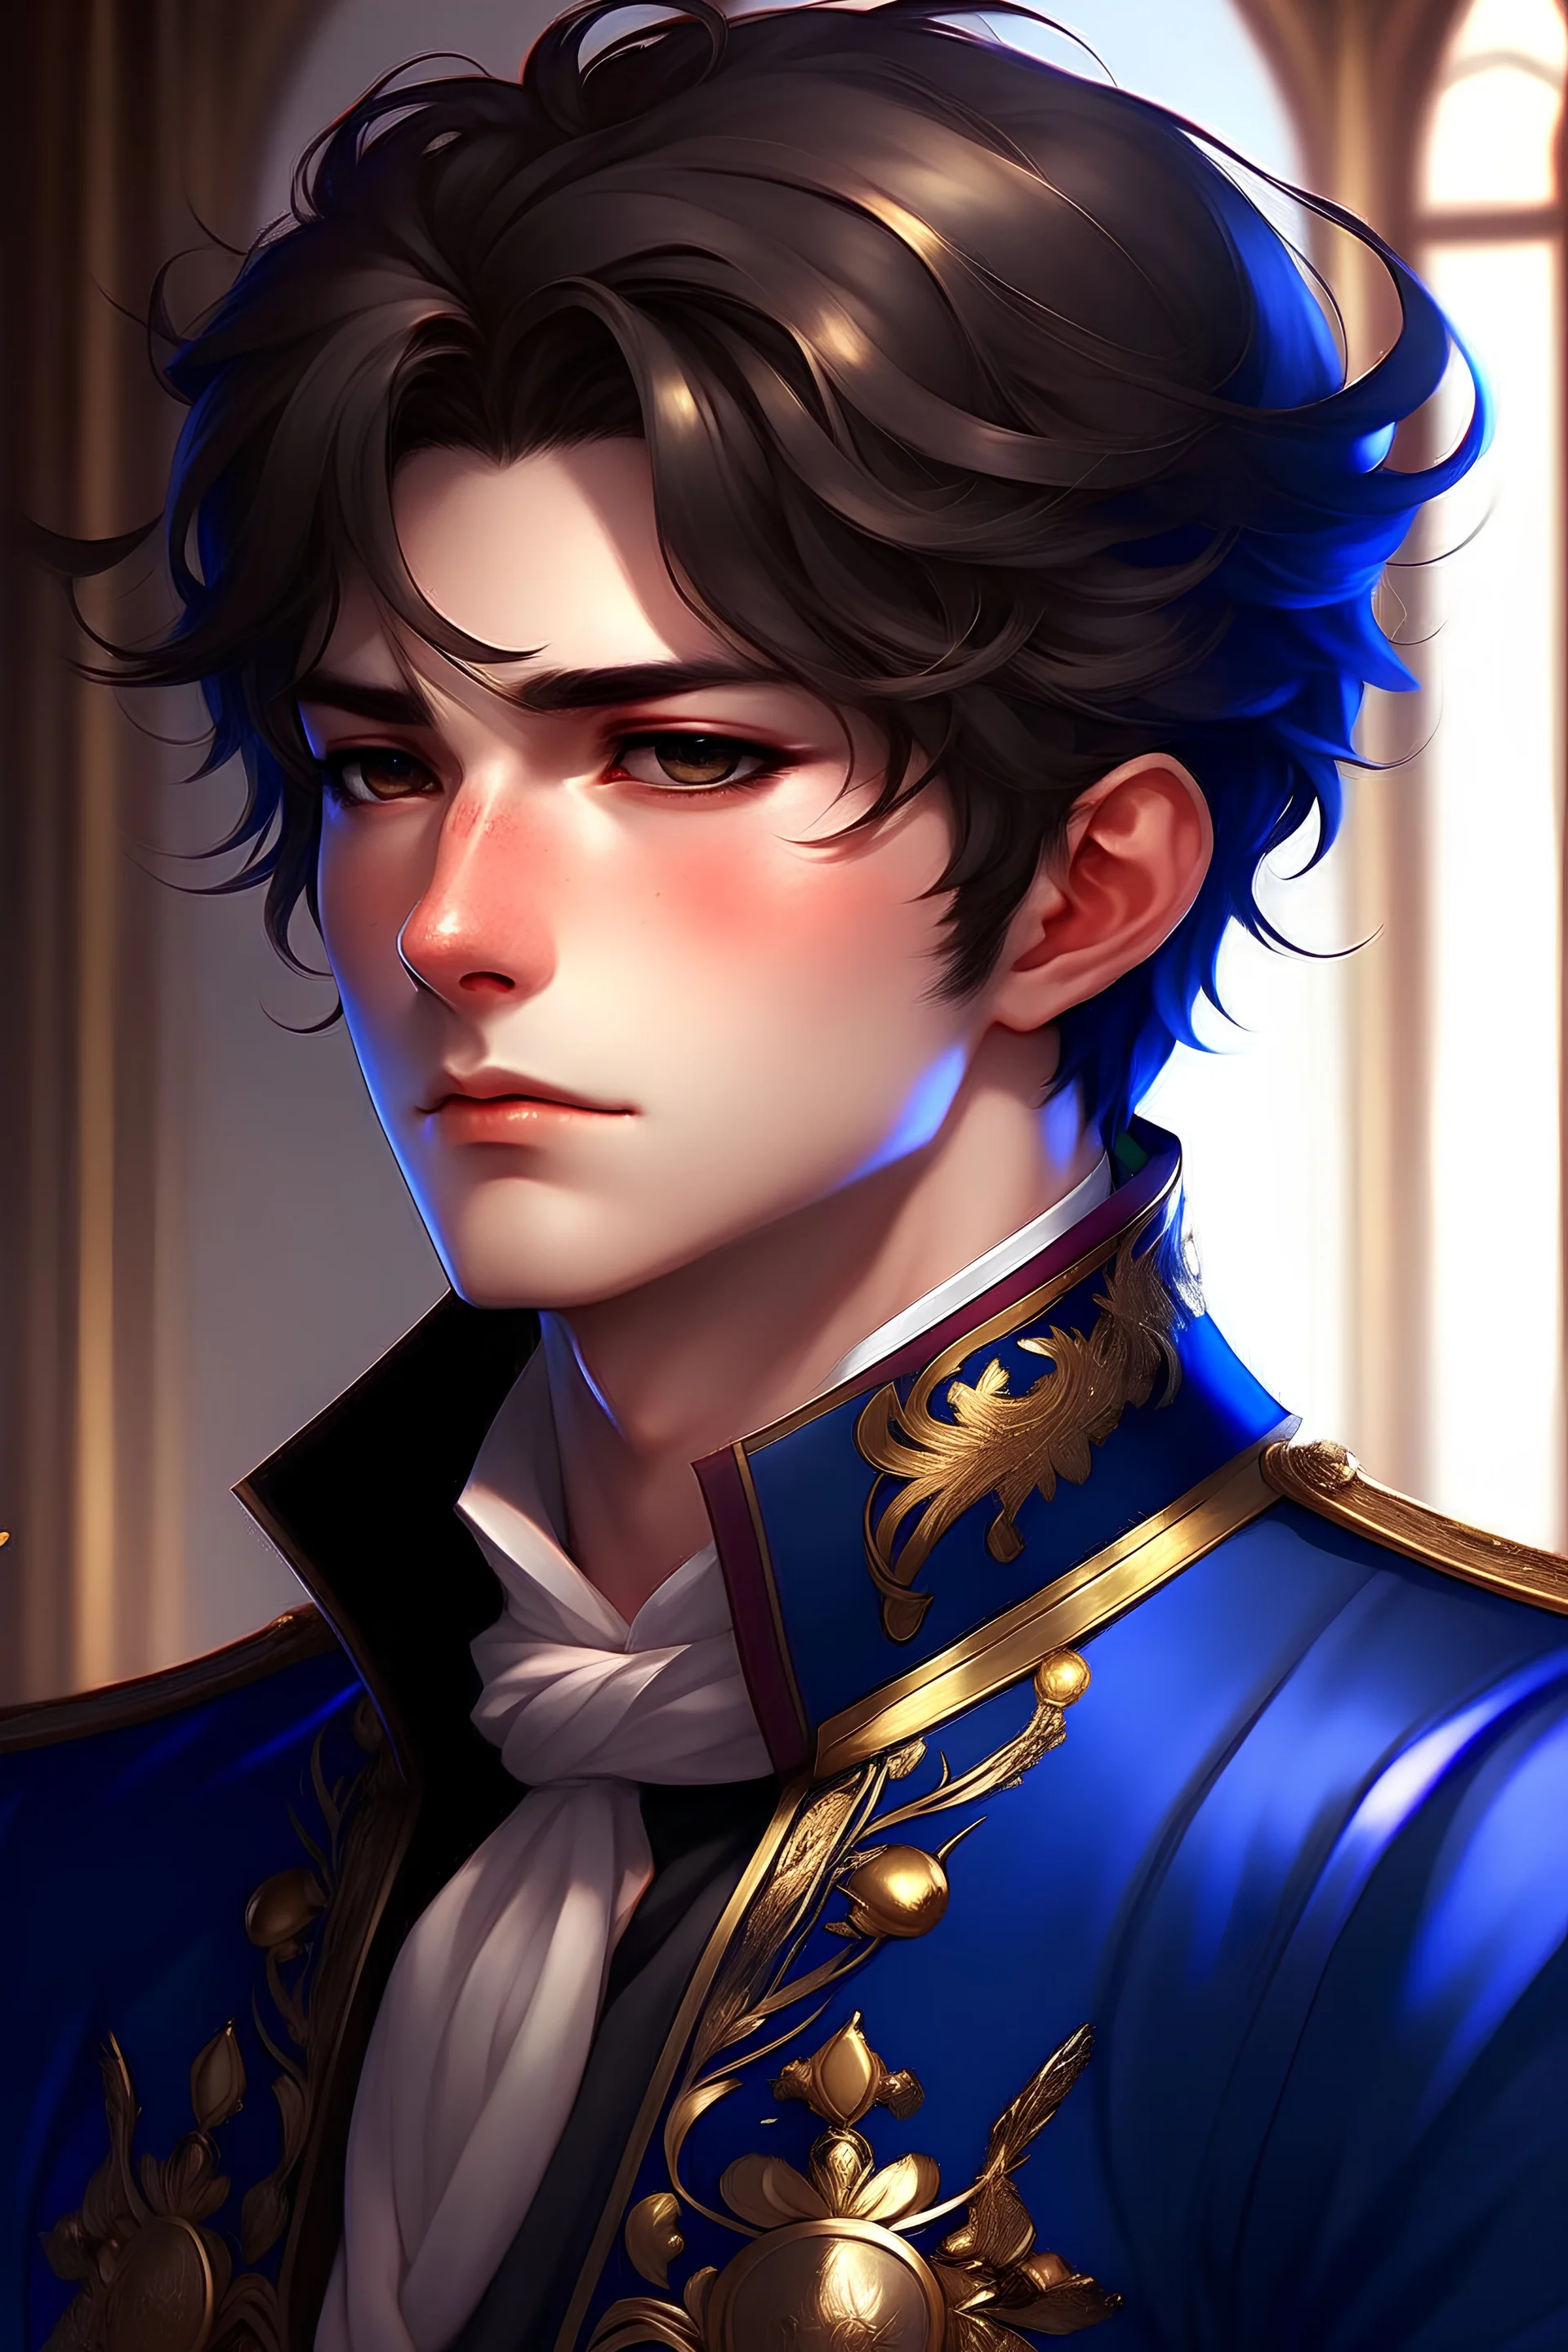 An extremely handsome prince, portrait, semi realism, anime male protagonist, book cover, looking cool and fierce, hair up, full view, royal attire